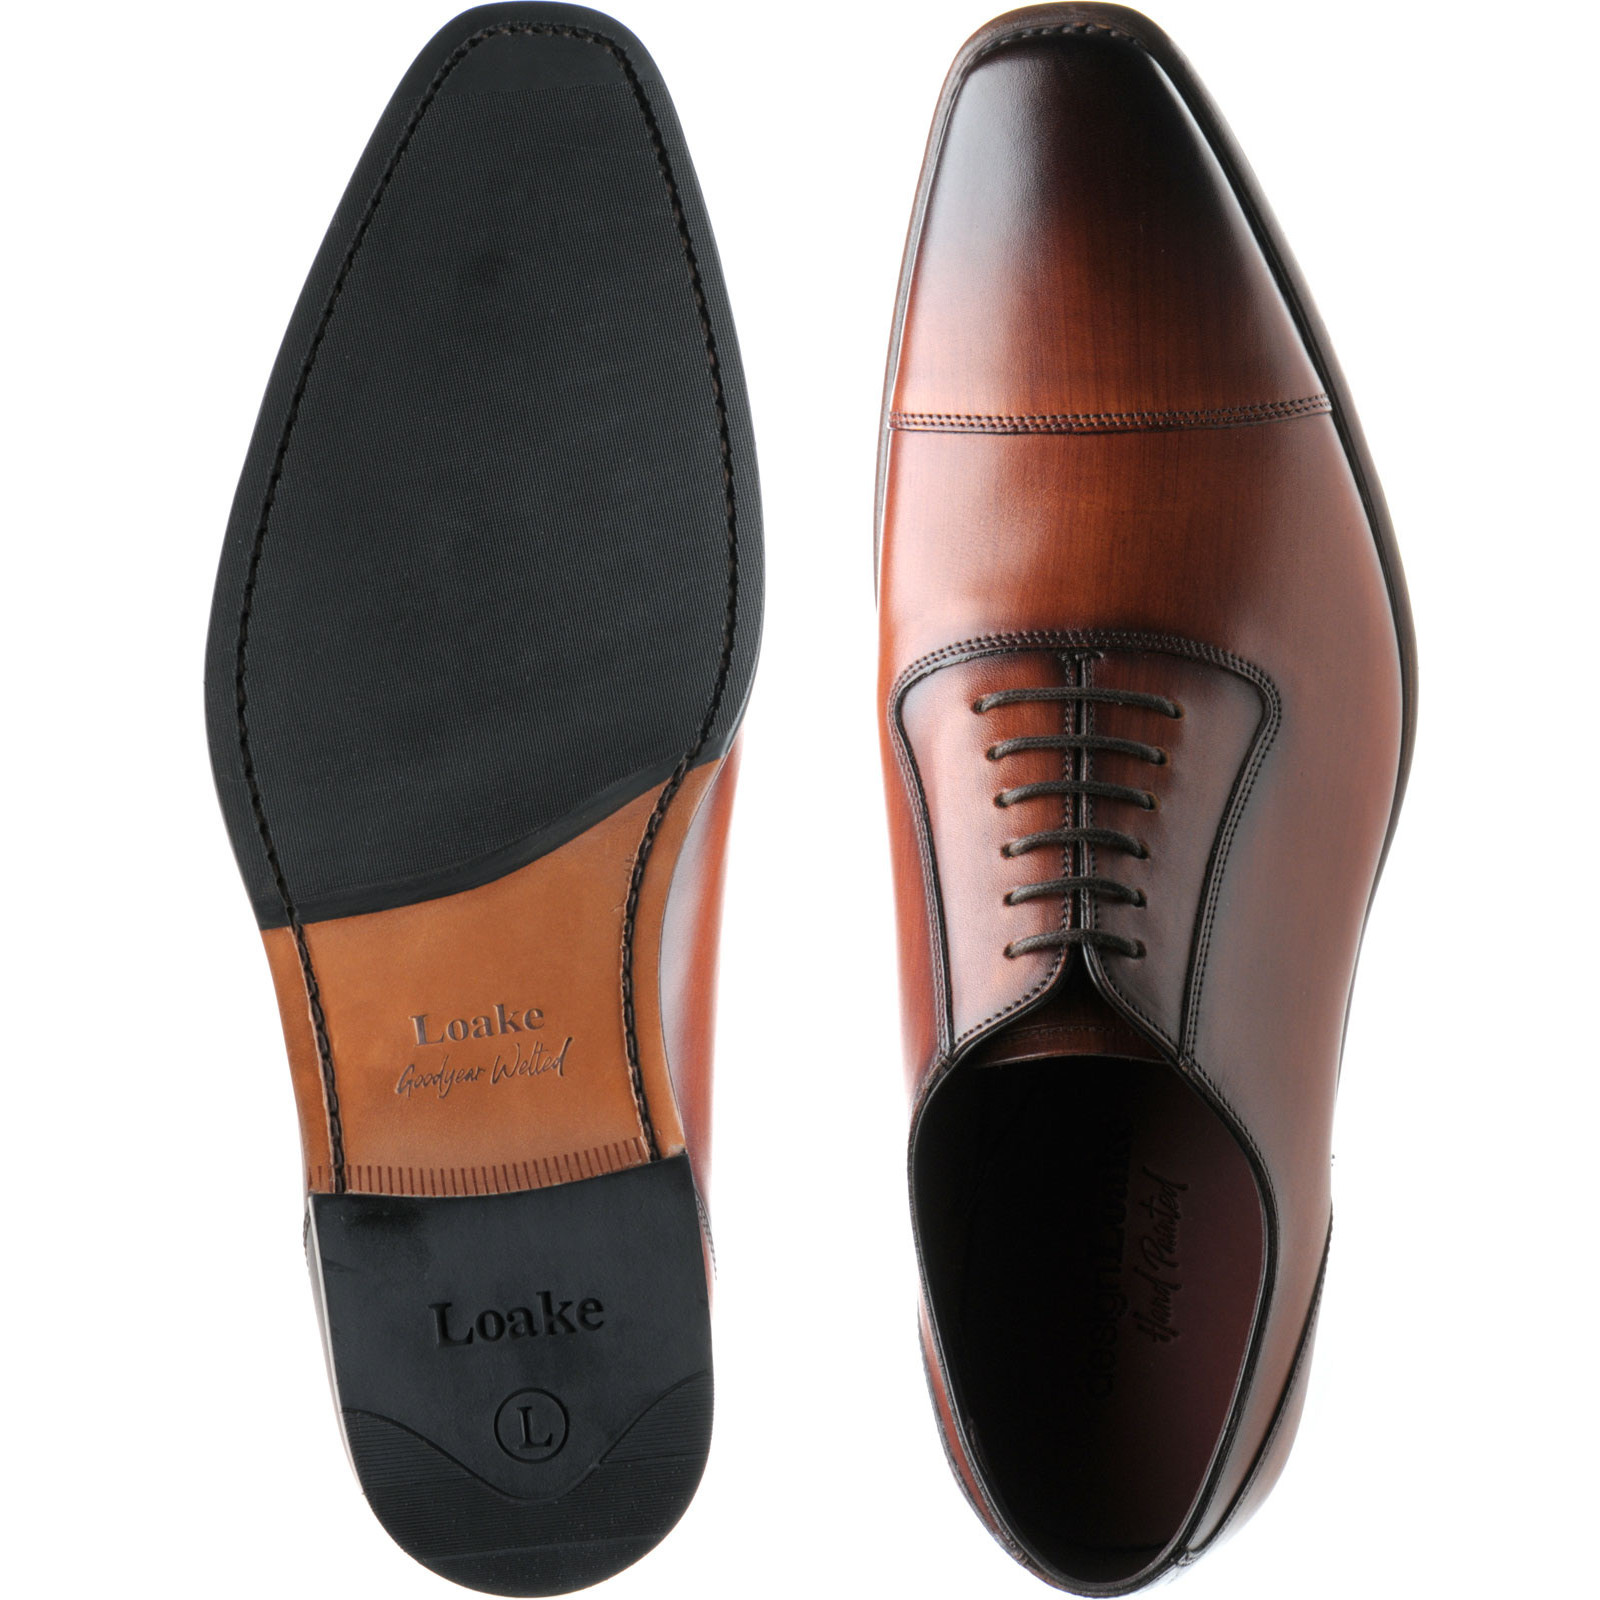 Loake shoes | Loake Design | Larch in Chestnut Calf at Herring Shoes